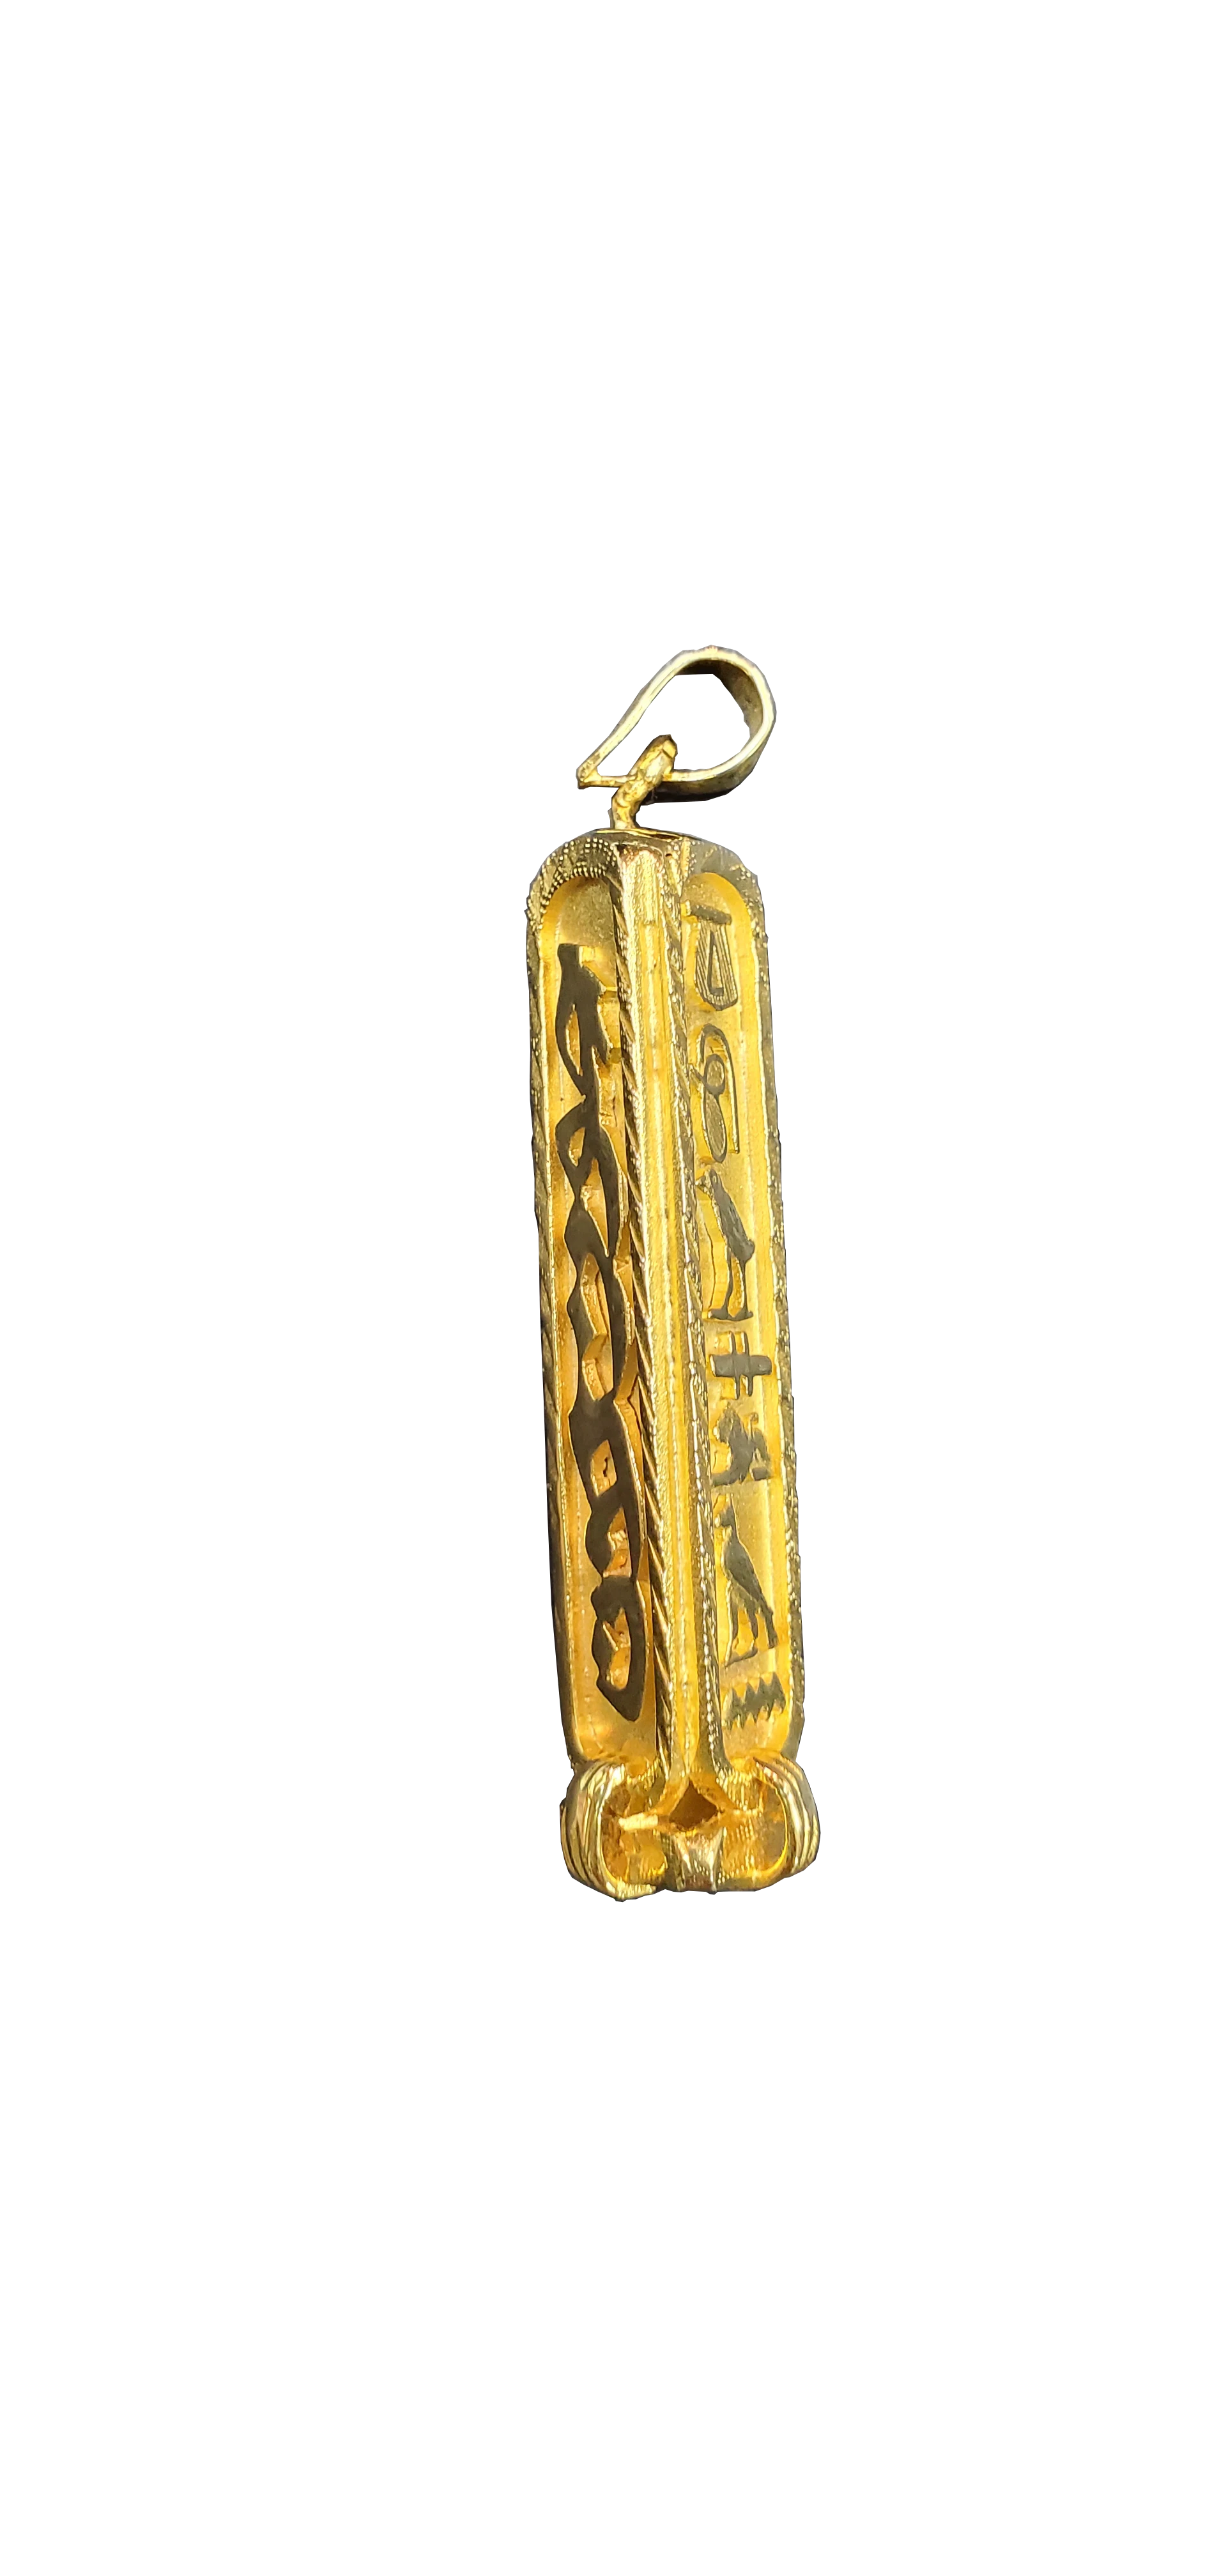 Amazon.com: 8k Solid Gold Personalized Cartouche Necklace, Custom Egyptian  Necklace, Hieroglyphic Personalized Pendant, Fancy Cartouche Necklace by  HStudio : Handmade Products